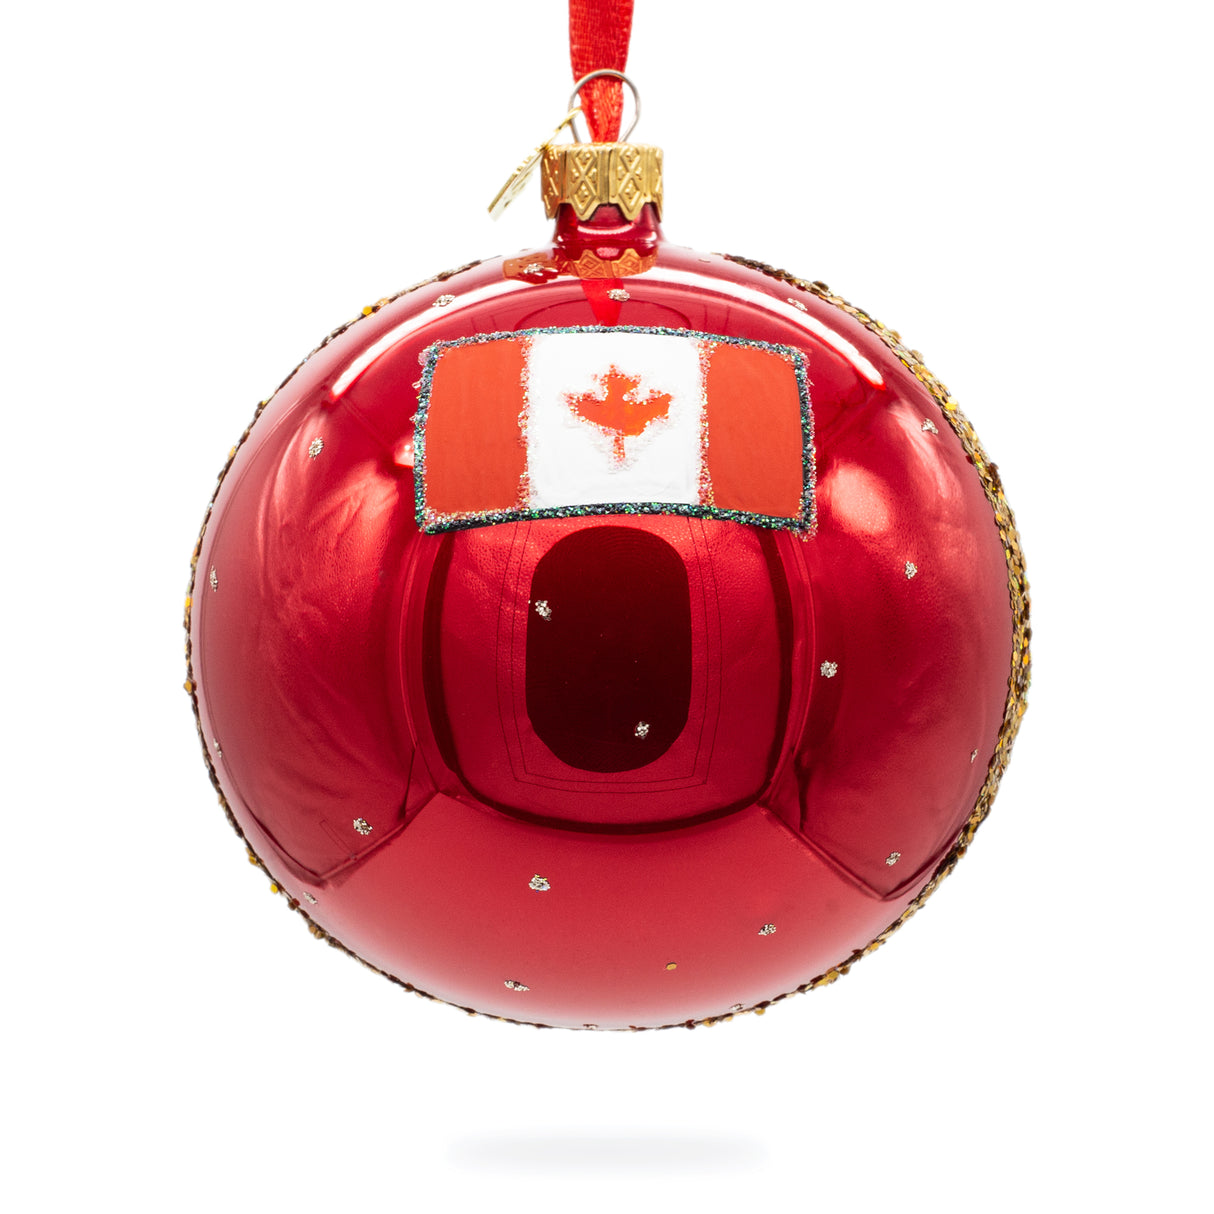 Buy Christmas Ornaments Travel North America Canada British Columbia Vancouver by BestPysanky Online Gift Ship